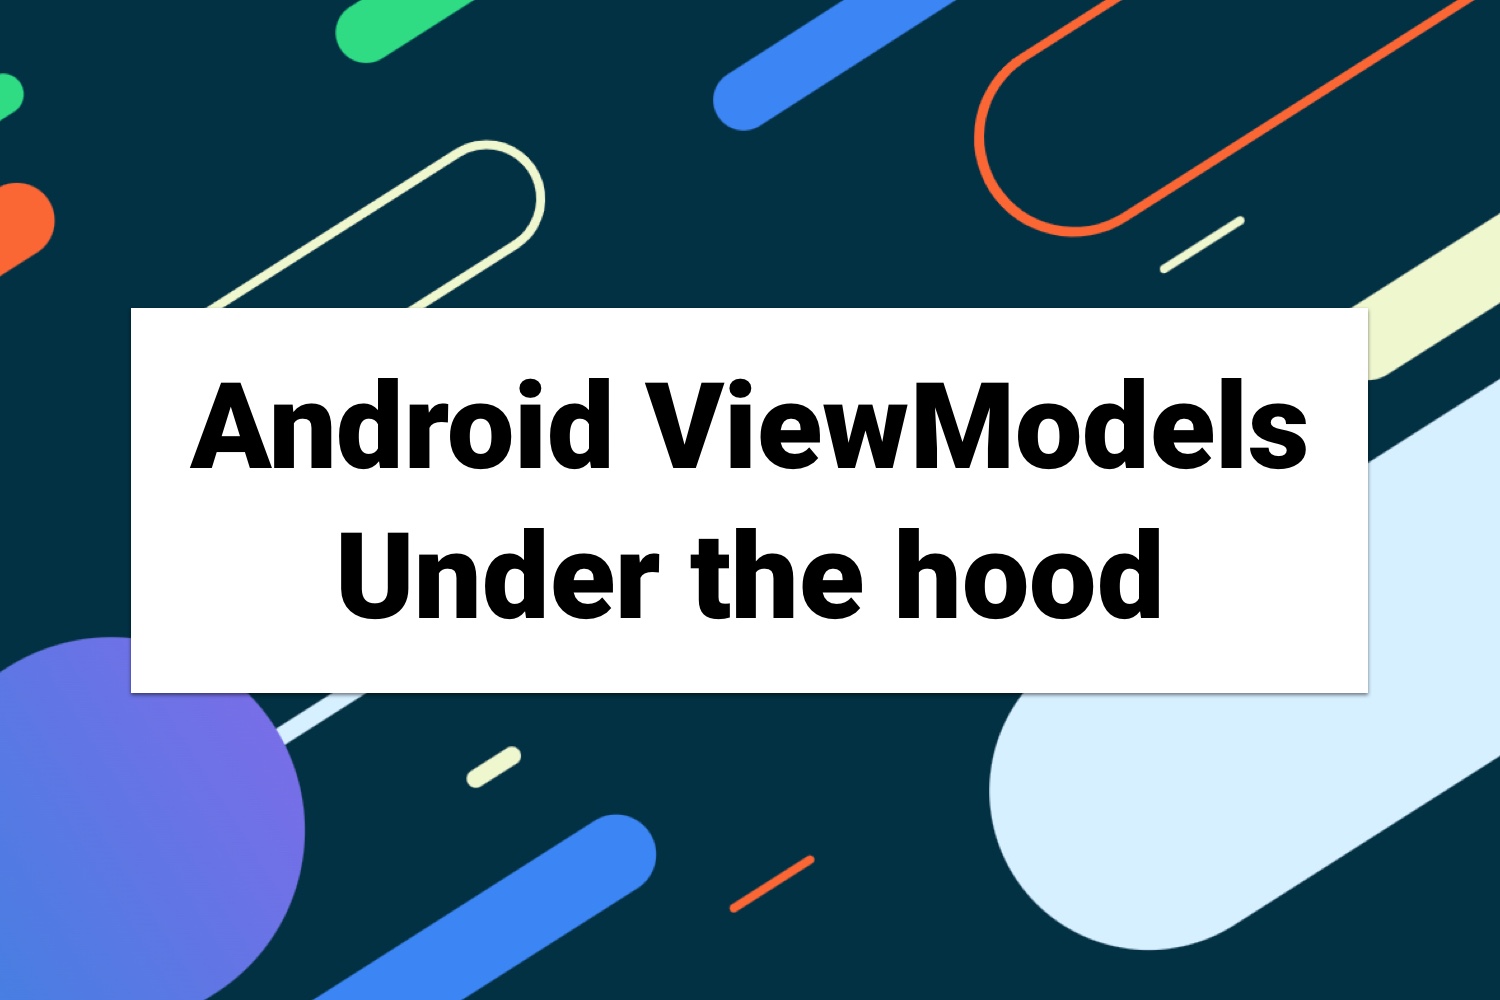 Android ViewModels: Under the hood